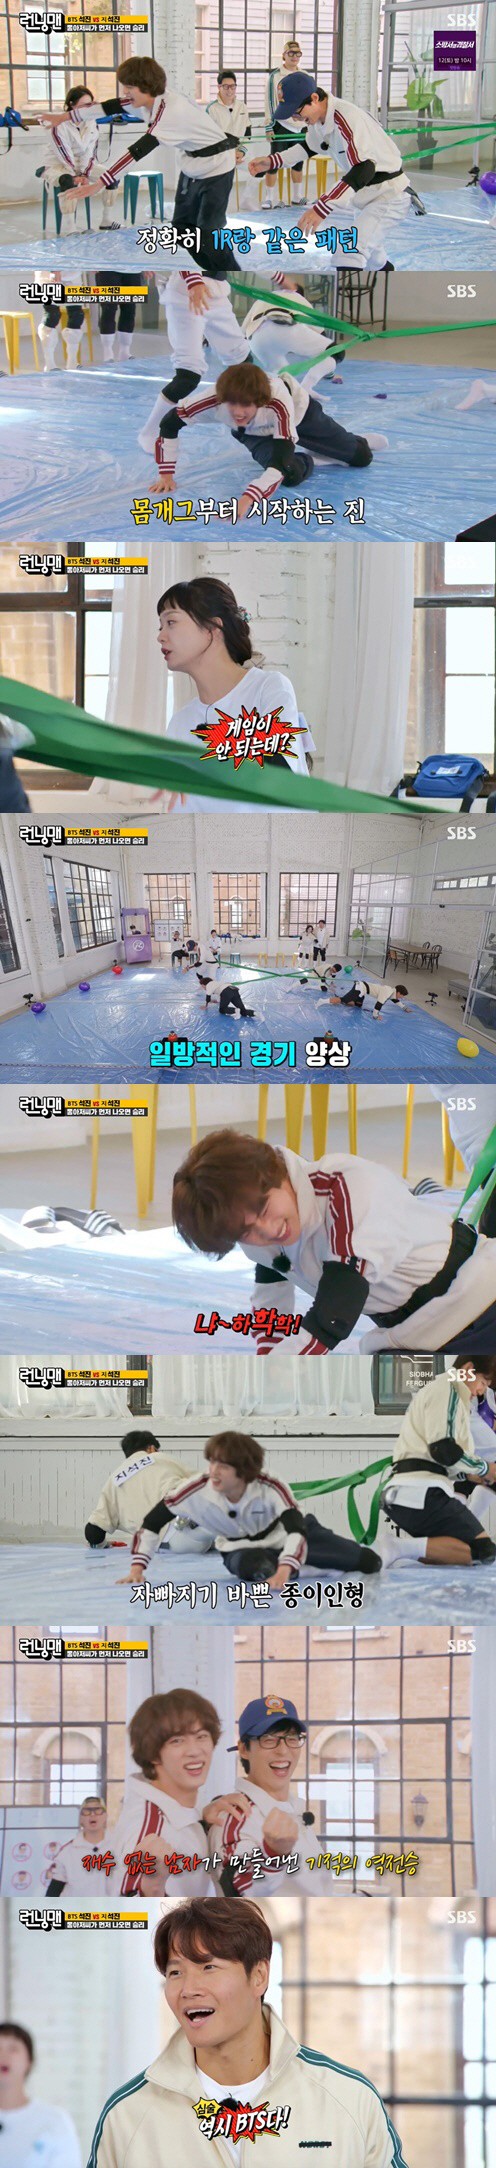 Running Man BTS Jean burst into fun sense with cool talk and hug.In SBS Running Man broadcasted on the 6th, BTS Jean appeared as a super guest.On this day, BTS Jin scrambled as a guest and teamed up with Ji Suk-jin to conduct a Seokjin vs. Seokjin race. The members randomly chose the amount of BTS Jin and Running Man Sejin to join each team member.At this time, Kim Jong-kook joined the team of Choices, Jin. The car door opened and the two greeted me with pleasure. In particular, Jin said, Did not you run into us in the past?Kim Jong-kook said, I wanted to see what kind of lightning this is. Kim Jong-kook told me an anecdote.Kim Jong-kook boasted, There are many people who are close to LA.The final members of the Ji Suk-jin team were Yoo Jae-Suk, Haha, and Song Ji-hyo. The members of the Jin team were Kim Jong-kook, Yang Se-chan and Jeon So-min.The members who chose Jean Choice showed the best tension by saying It is too strange, It is too good luck and It is too handsome, while the members who chose Ji Suk-jin team are It is the worst, It is a different stone. Jin said, Running Man is so good and It looks like an entertainer.Jin and Ji Suk-jin used to drink in private.Yoo Jae-Suk said, I paid for the drink, and Jin said, Do not you have to pay as a Superstar? He said, My brother came late, and we were already drinking. It was a reasonable calculation.When Jin appeared on the day, the members expressed curiosity about the daily life of Superstar Jin, saying, The true Superstar has come. Yoo Jae-Suk, What kind of star have you been acquainted with abroad?, Have you ever been invited to an overseas stars house?What do you think when you get a prize on the Billboard? And various other questions were poured into Jean, and the atmosphere of the scene became even hotter.Jean said, The formula is Superstar. He said, John Legend picked up our album and got his autograph. He caught sight of an anecdote he met with world pop singer John Legend.Jean also said, I was invited to the party but I never went.Jin performed a variety of missions with the members on this day, especially when Jin showed off his talent in the game, It is not, but it is burning. The game was a rule that the member could attack with a word that the other team could not recognize.The attacked member can shout No and show the reason why it is not in words and actions, and then attack again. If you can not tell the reason why you are not convinced, -1 point, miss the attack timing or lose your mind.At this time, Jean asked, Do you like RM among your members? No, but I do not like RM. Why is my head so smart? Oh, Im unlucky. Jean then showed an unexpected body gag in a mission to compete in soapy water, and showed a picture of a paper doll.Pirate roulette was added to the soapy water mission, and luck played an important role. Kim Jong-kook said, I will push it with force. Yoo Jae-Suk, who is now confronted, teamed up with Jin and said, This is more important than luck.Unlike the exhilarating appearance, Shoes Brothers Yoo Jae-Suk and Jin were dragged to the runaway Kim Jong-kook and made the scene into a laughing sea.The members who watched Jins drowning were not able to taste it, saying, It is full of humanity, Jins loophole ... and Game is not good.Yoo Jae-Suk and Jin, who were struggling against Kim Jong-kook, said, Lets go at once.Kim Jong-kook said, Its also BTS.